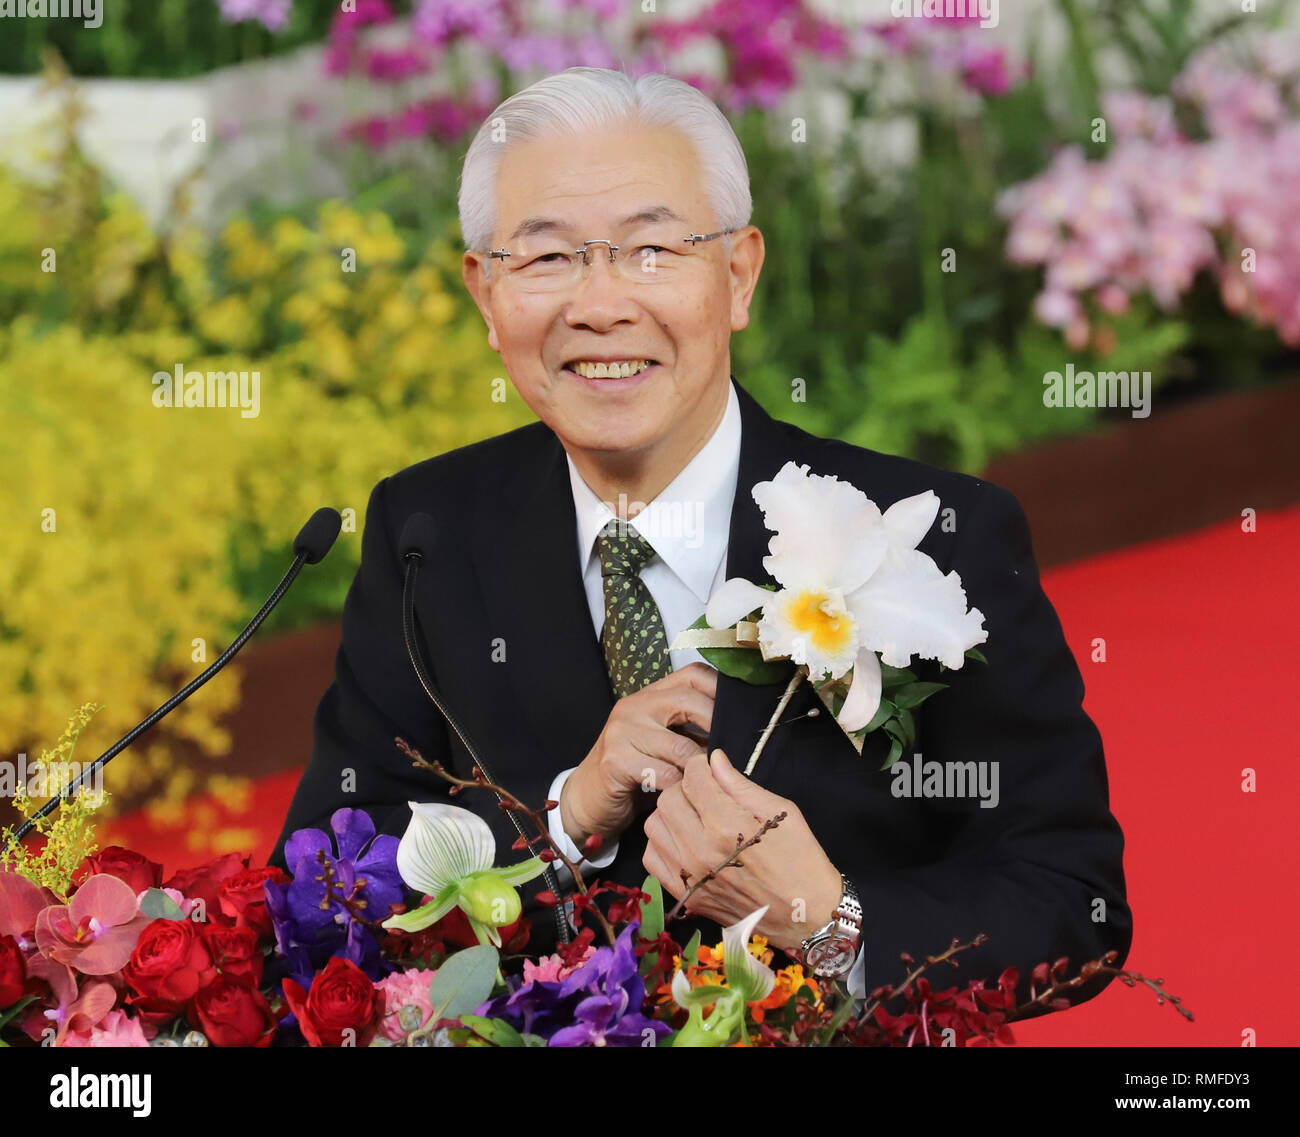 Tokyo, Japan. 15th Feb, 2019. Japan's largest newspaper Yomiuri Shimbun Holdings chairman Kojiro Shiraishi delivers a speech at the opening ceremony for 'JGP International Orchid and Flower Show' at the Tokyo Dome stadium in Tokyo on Friday, February 15, 2019. The annual flower festival with 3,000 types, 100,000 plants orchids will be held from February 15 through 22. Credit: Yoshio Tsunoda/AFLO/Alamy Live News Stock Photo